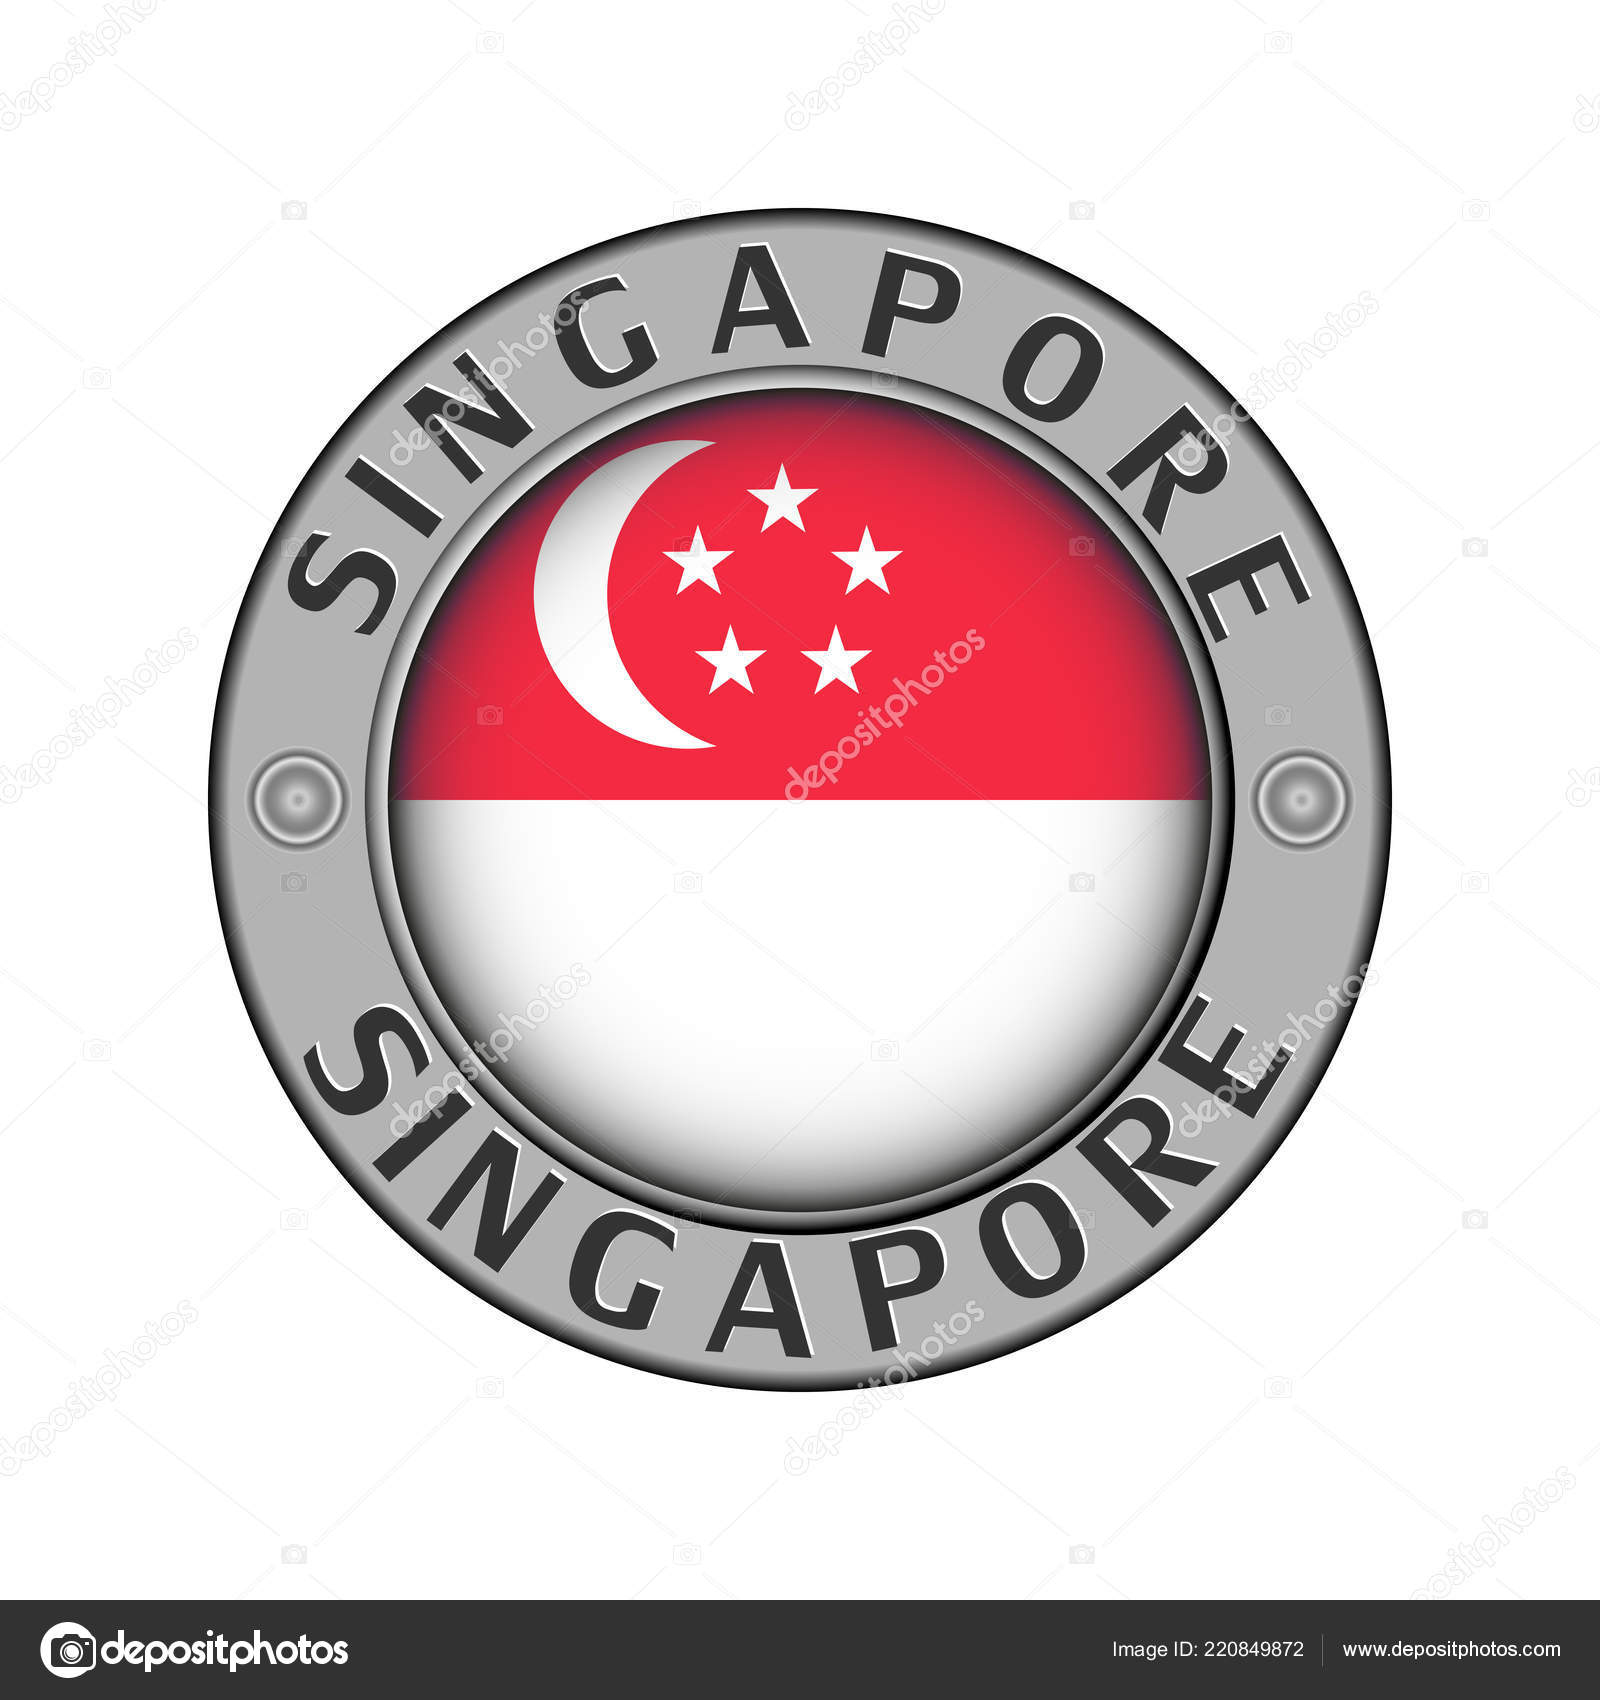 Image result for singapore name